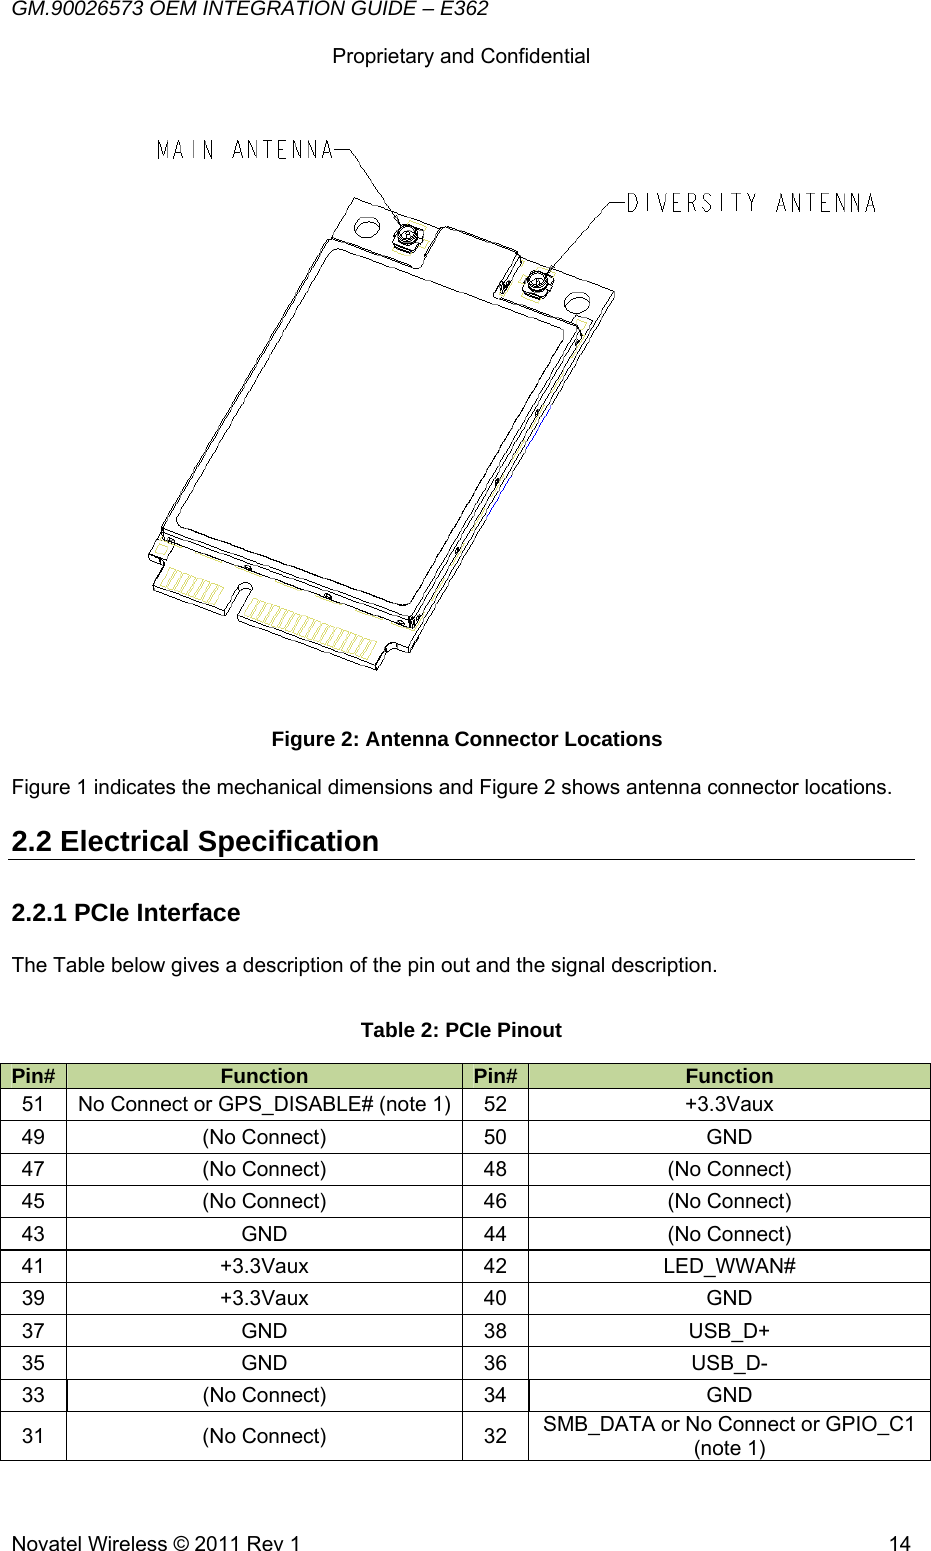 GM.90026573 OEM INTEGRATION GUIDE – E362      Proprietary and Confidential   Novatel Wireless © 2011 Rev 1  14                                                                   Figure 2: Antenna Connector Locations Figure 1 indicates the mechanical dimensions and Figure 2 shows antenna connector locations. 2.2 Electrical Specification  2.2.1 PCIe Interface  The Table below gives a description of the pin out and the signal description. Table 2: PCIe Pinout Pin#  Function  Pin# Function 51  No Connect or GPS_DISABLE# (note 1) 52  +3.3Vaux 49 (No Connect) 50  GND 47  (No Connect)  48  (No Connect) 45  (No Connect)  46  (No Connect) 43 GND 44 (No Connect) 41 +3.3Vaux 42 LED_WWAN# 39 +3.3Vaux 40  GND 37 GND 38 USB_D+ 35 GND 36 USB_D- 33 (No Connect) 34  GND 31 (No Connect) 32 SMB_DATA or No Connect or GPIO_C1 (note 1) 